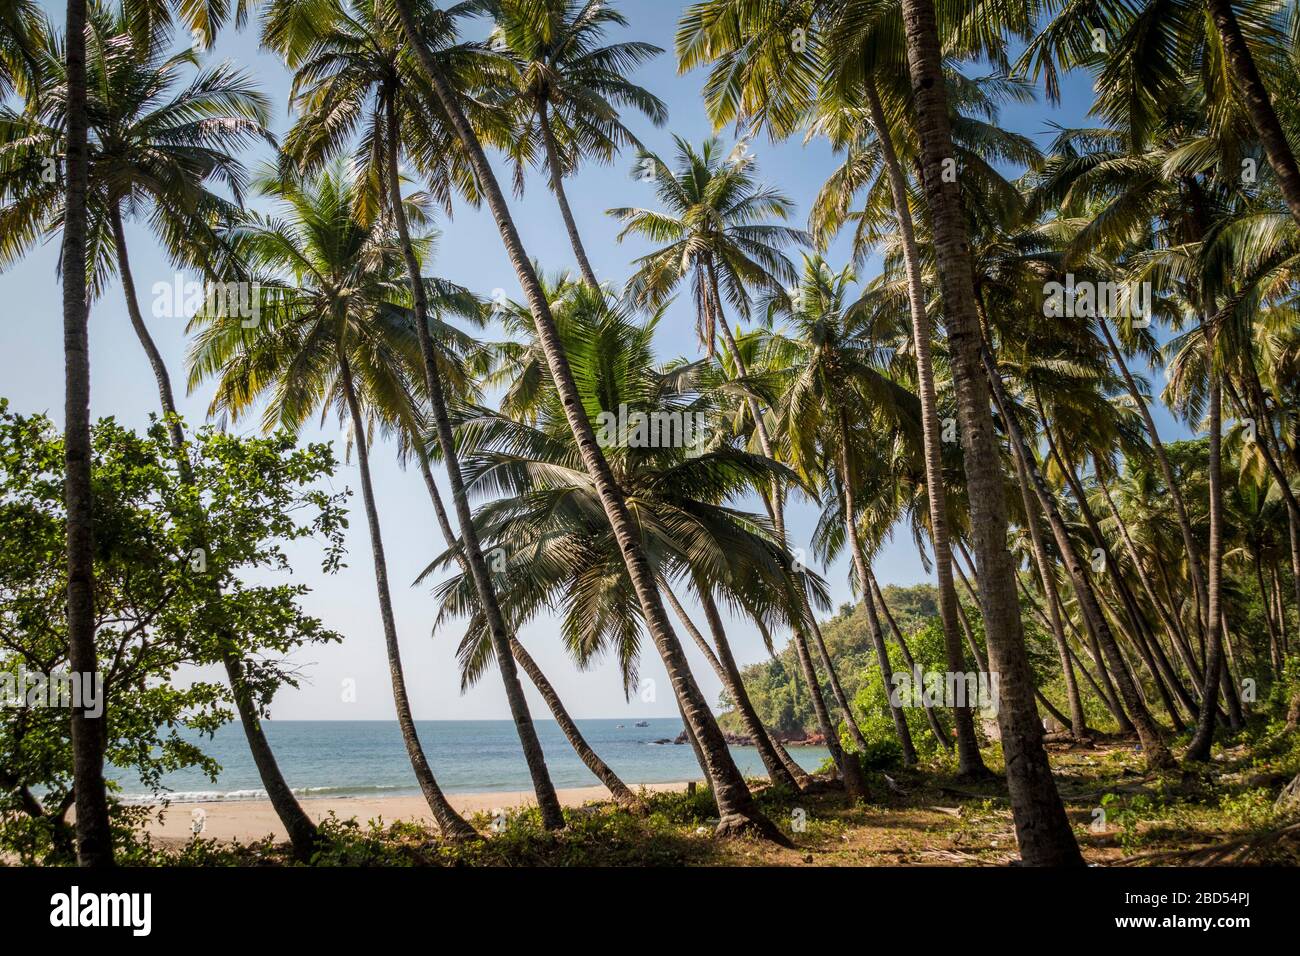 Tropical beach landscape in Goa, India, seeing the ocean through palm trees in very relaxing and uplifting environment Stock Photo